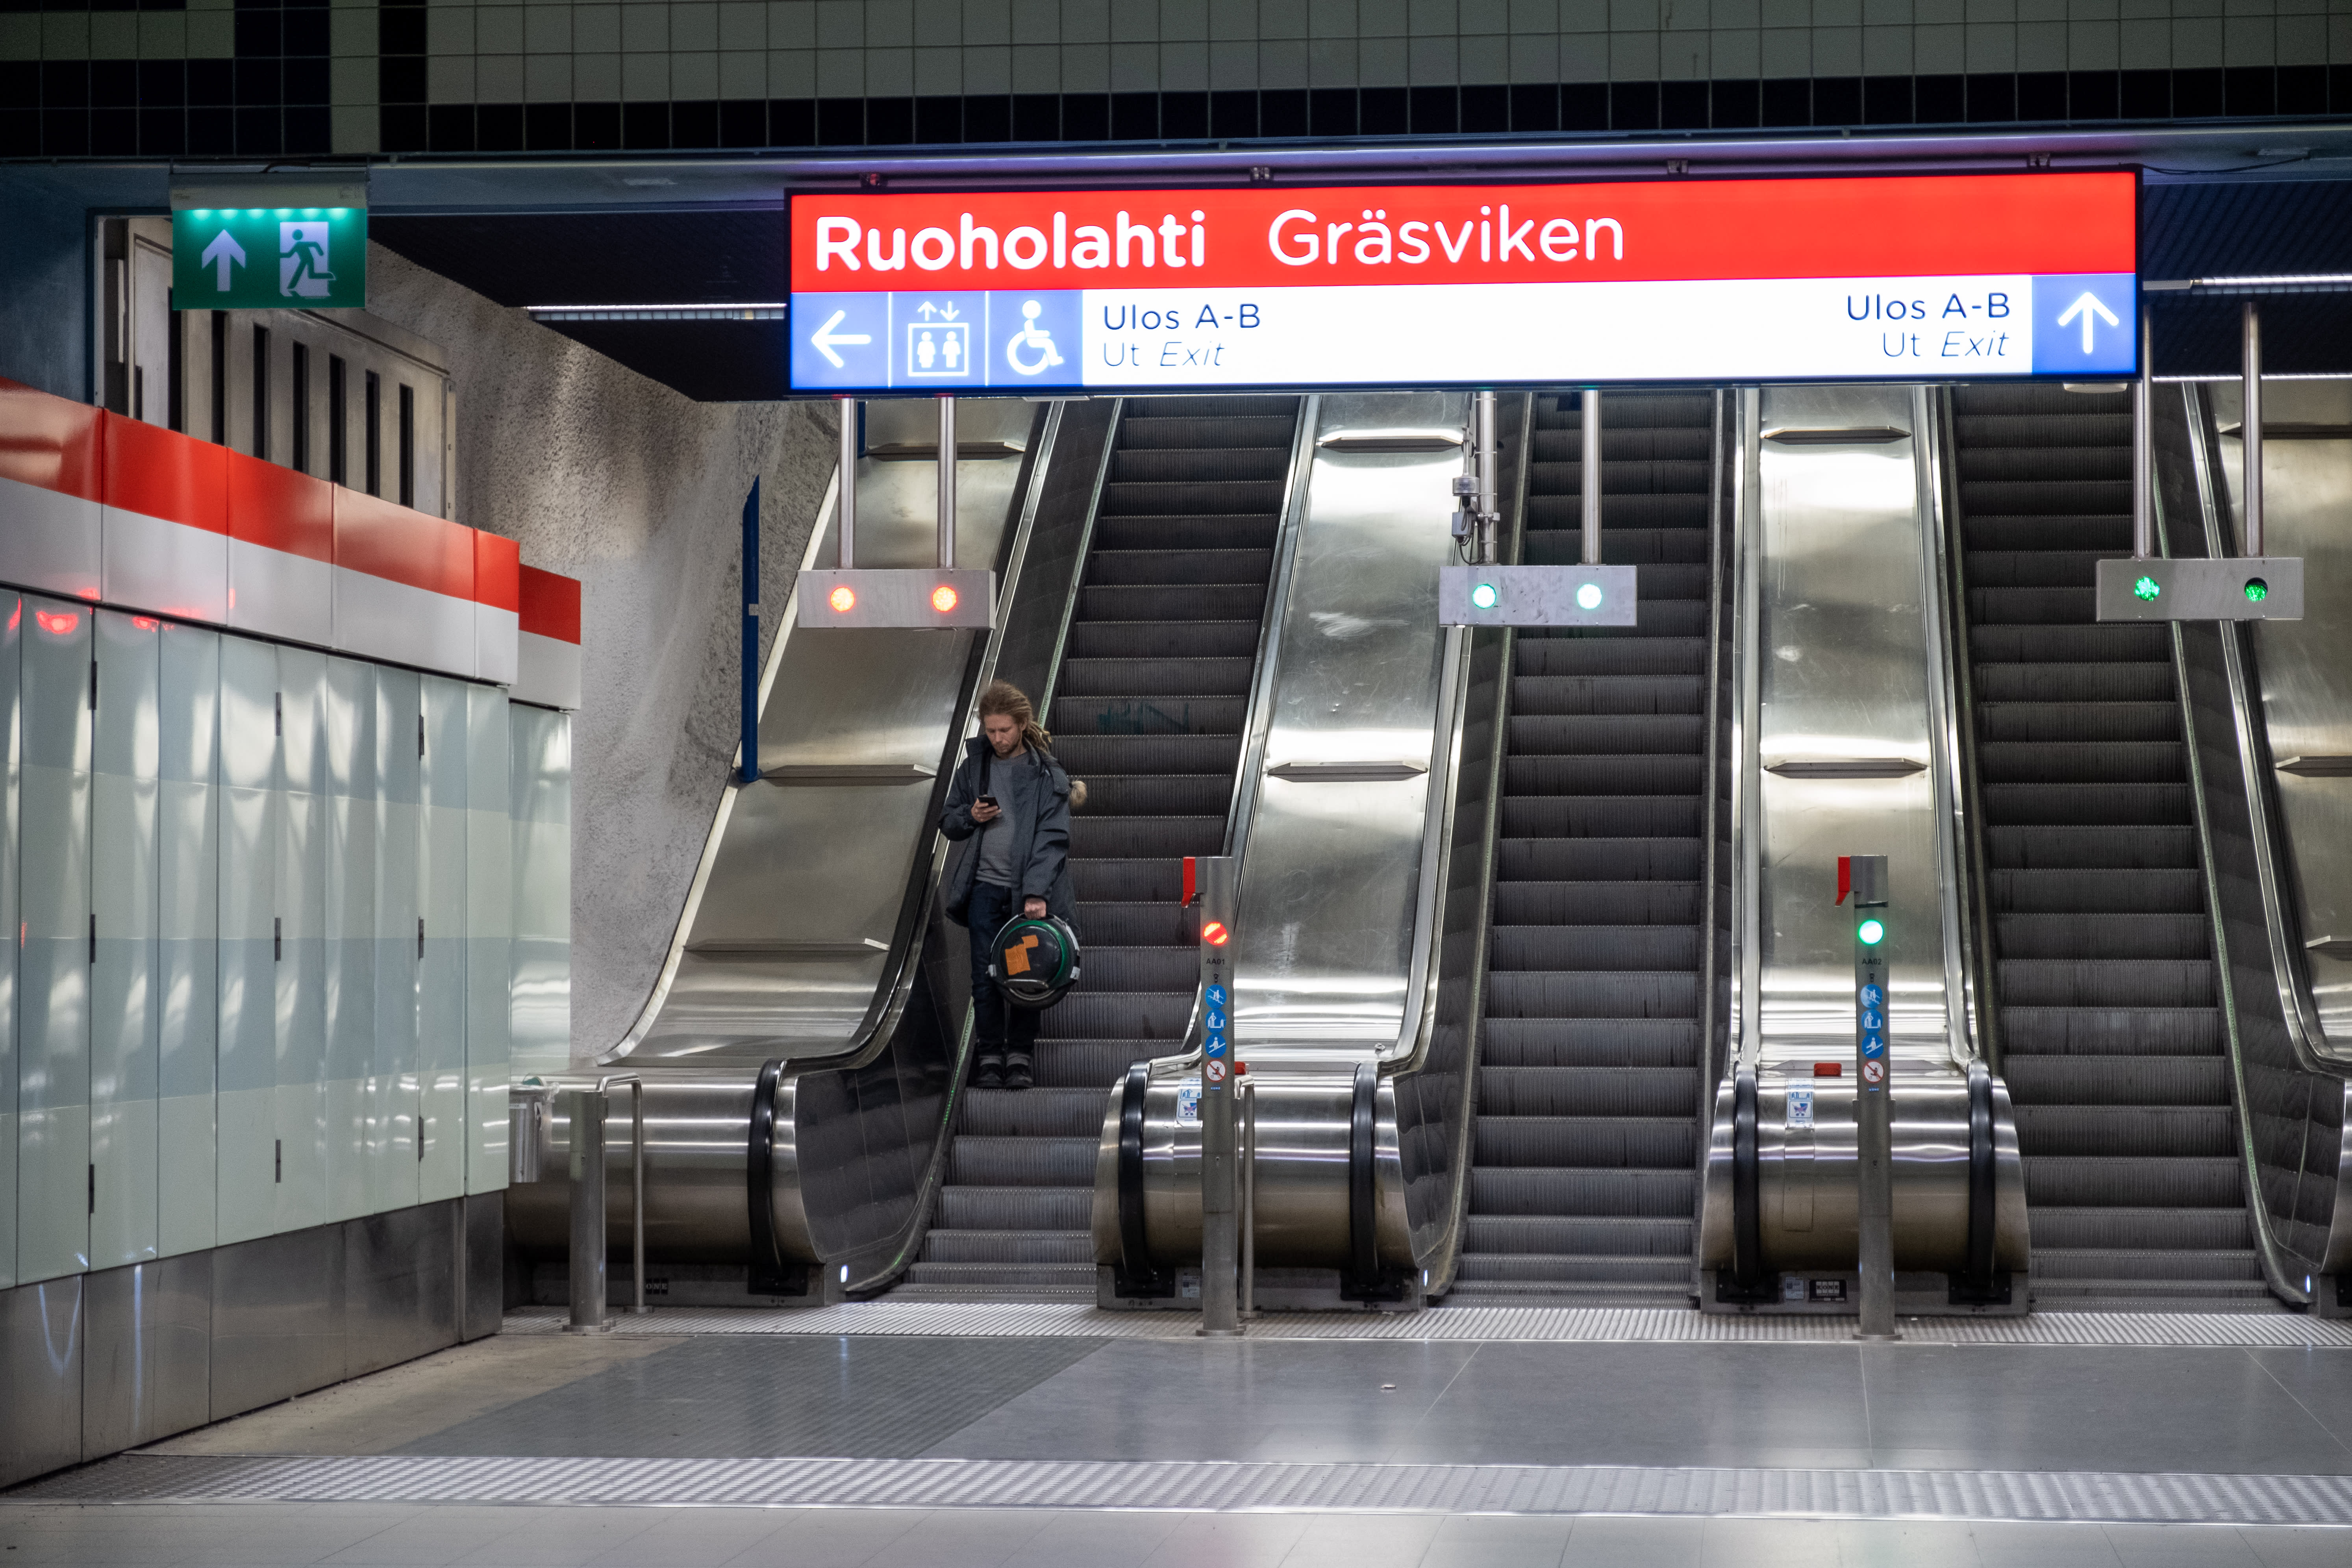 The 18-year-old was sentenced to 5 years in prison for stabbing the Helsinki metro